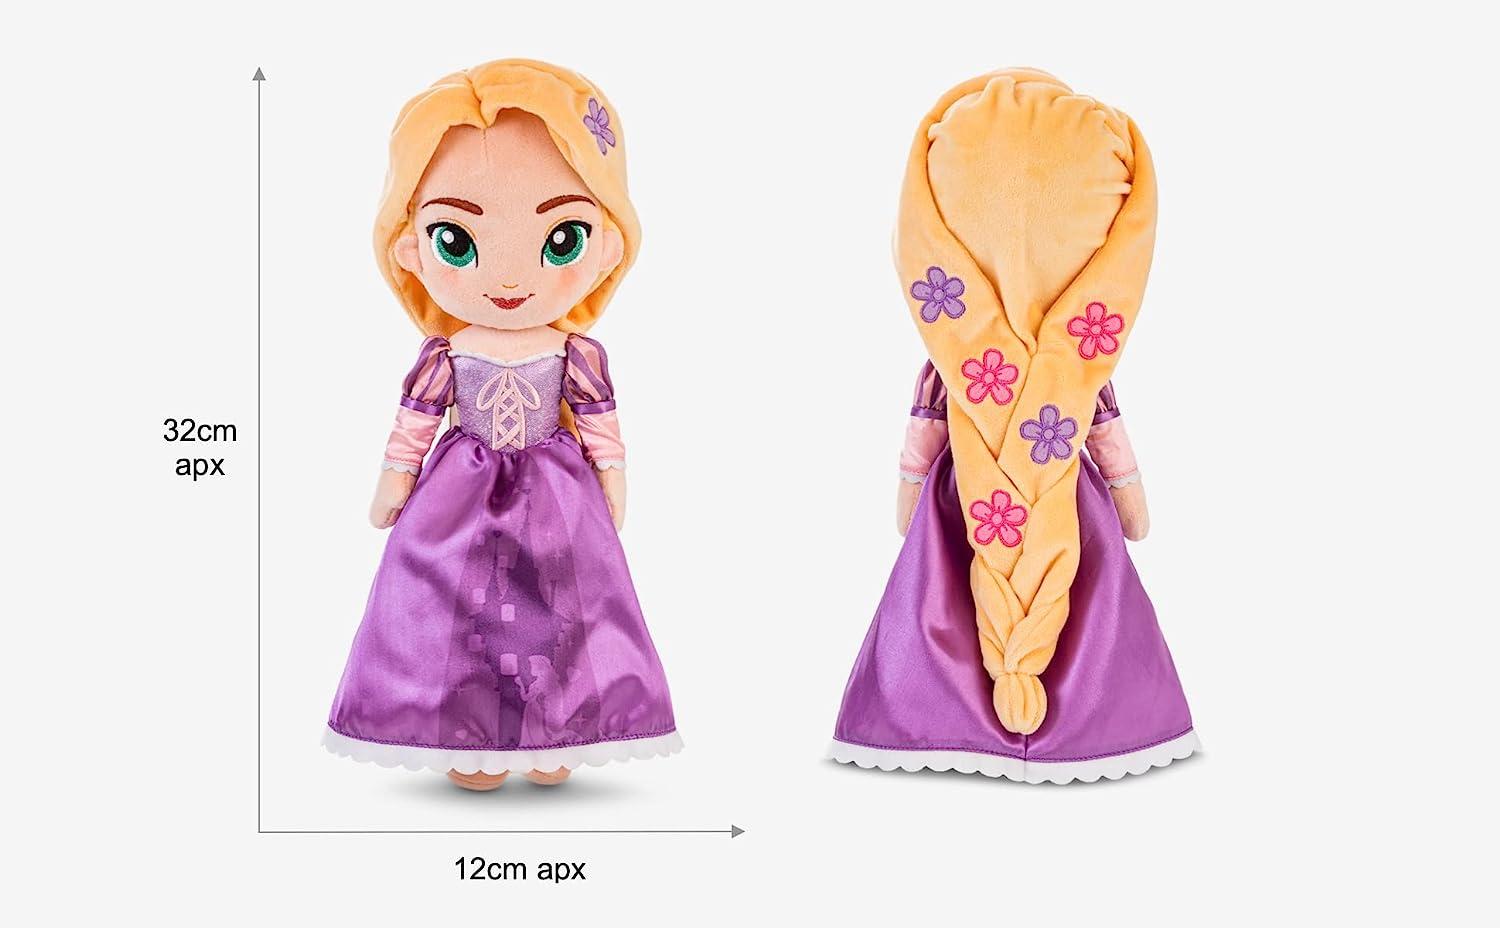 Disney Store Official Rapunzel Soft Toy Doll, Tangled, 32cm Soft Plush